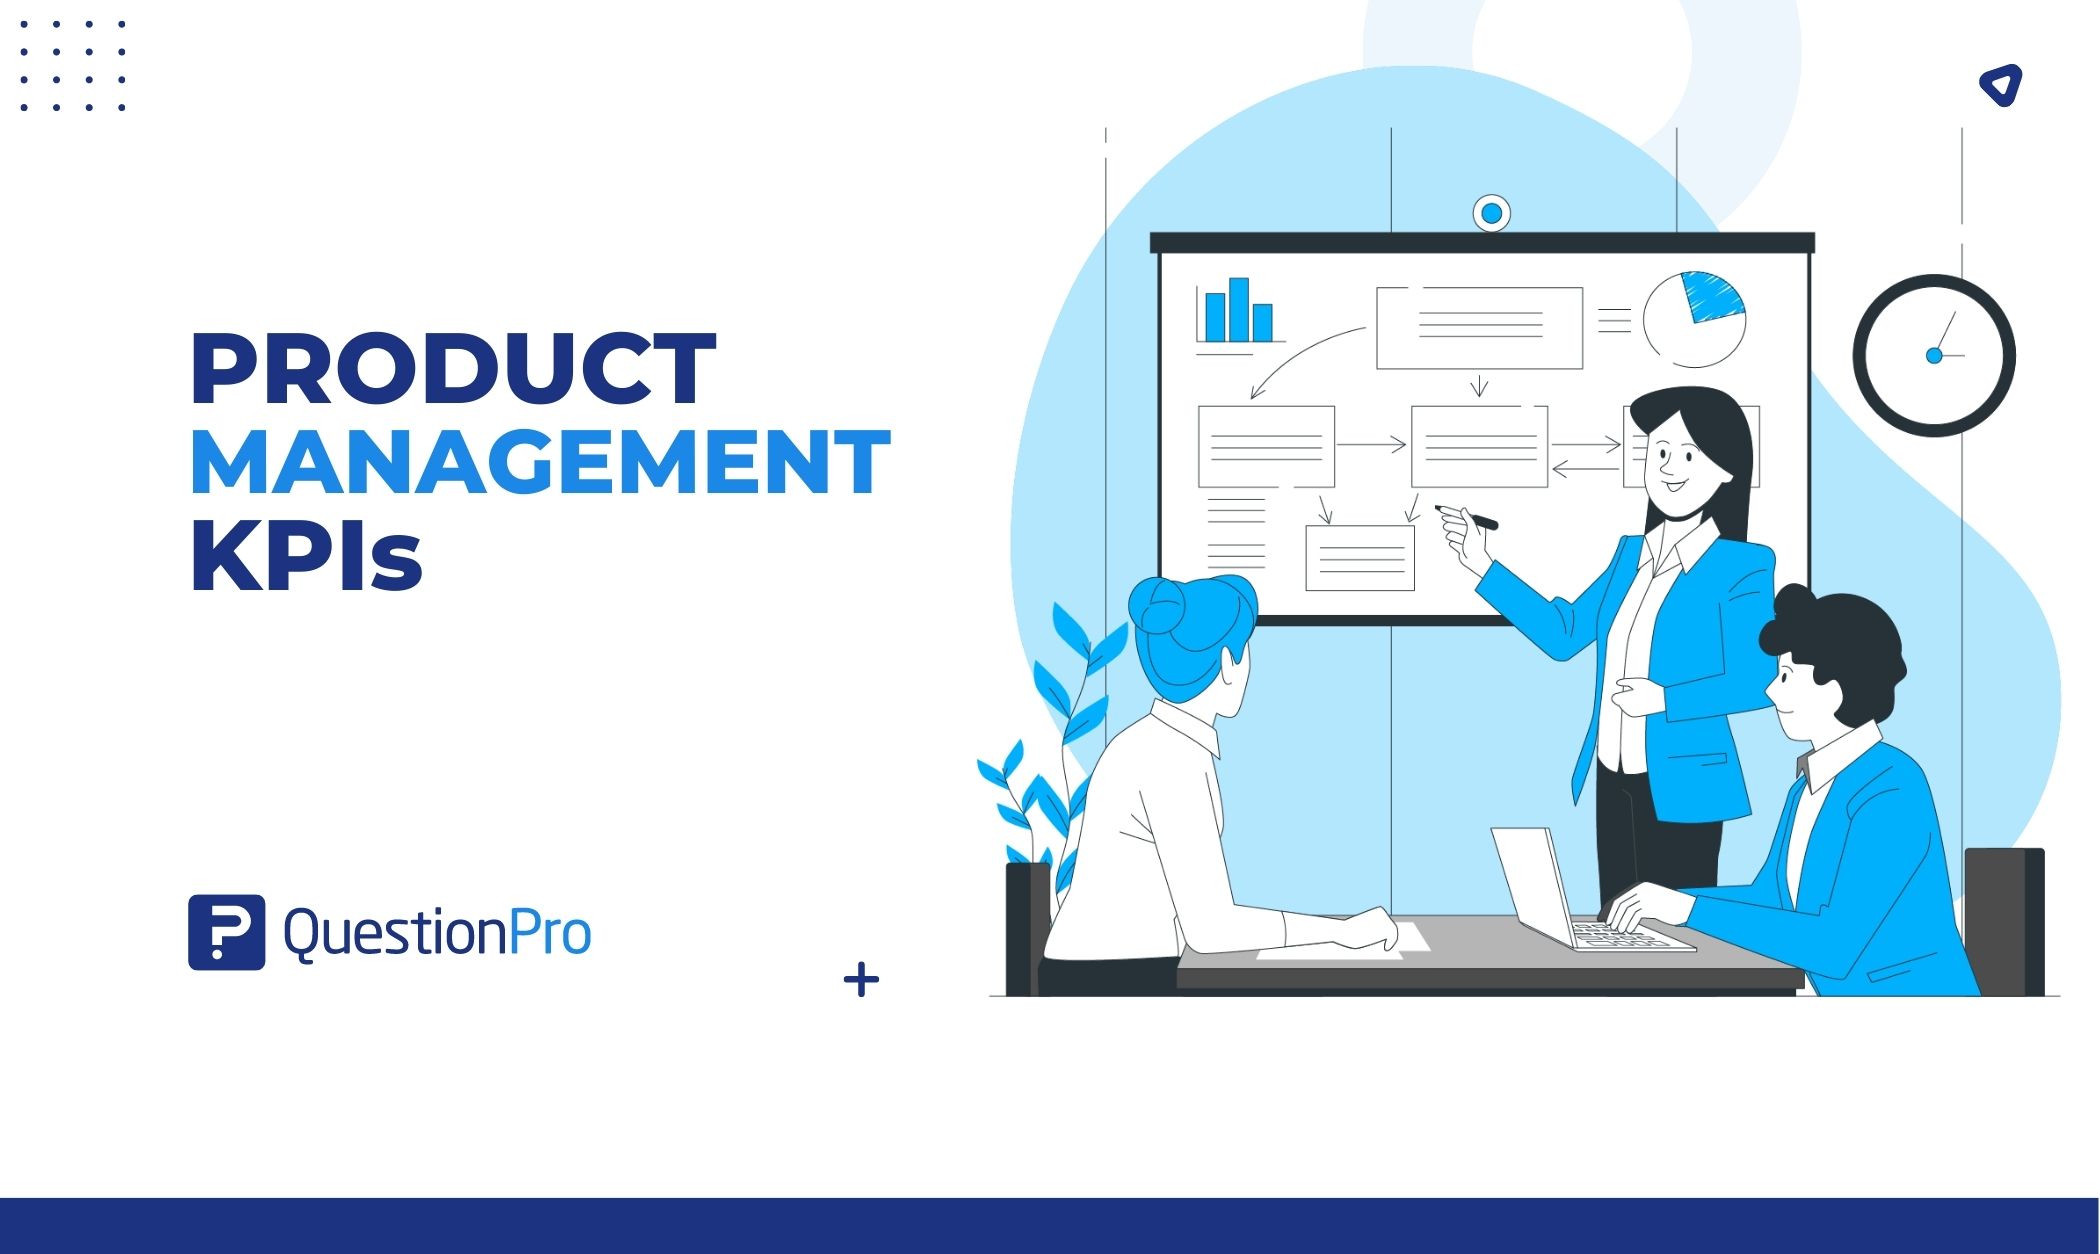 Product management KPI shows how often users utilize your product and analyze it usage data. Learn if & when users return to your product.